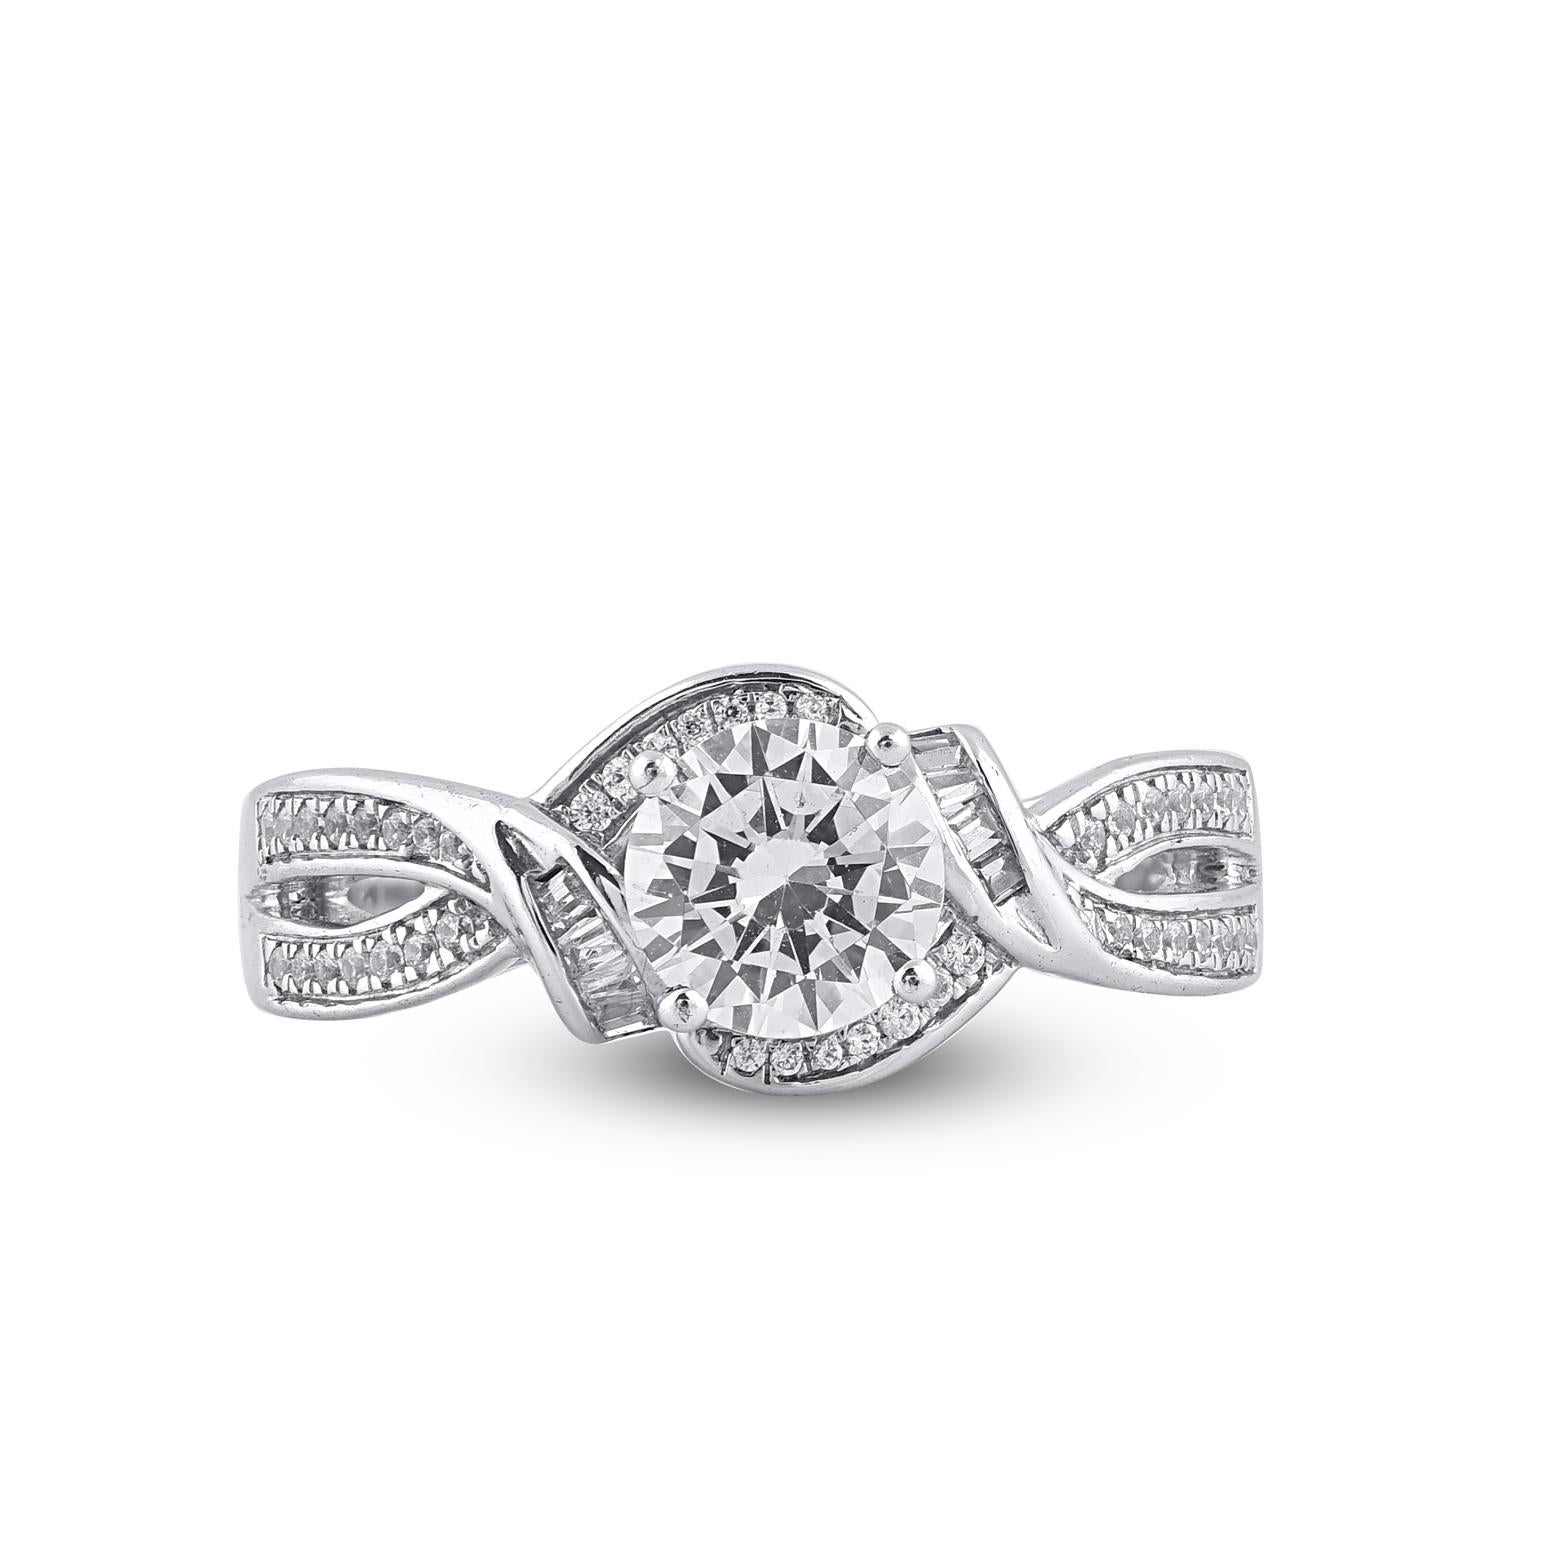 Stunning and exquisite, this diamond ring is beautifully crafted in 14K Solid White gold. This bypass ring is lined with rows of 55 round brilliant-cut, single cut and baguette cut sparkling white diamonds in secured prong, pave and channel